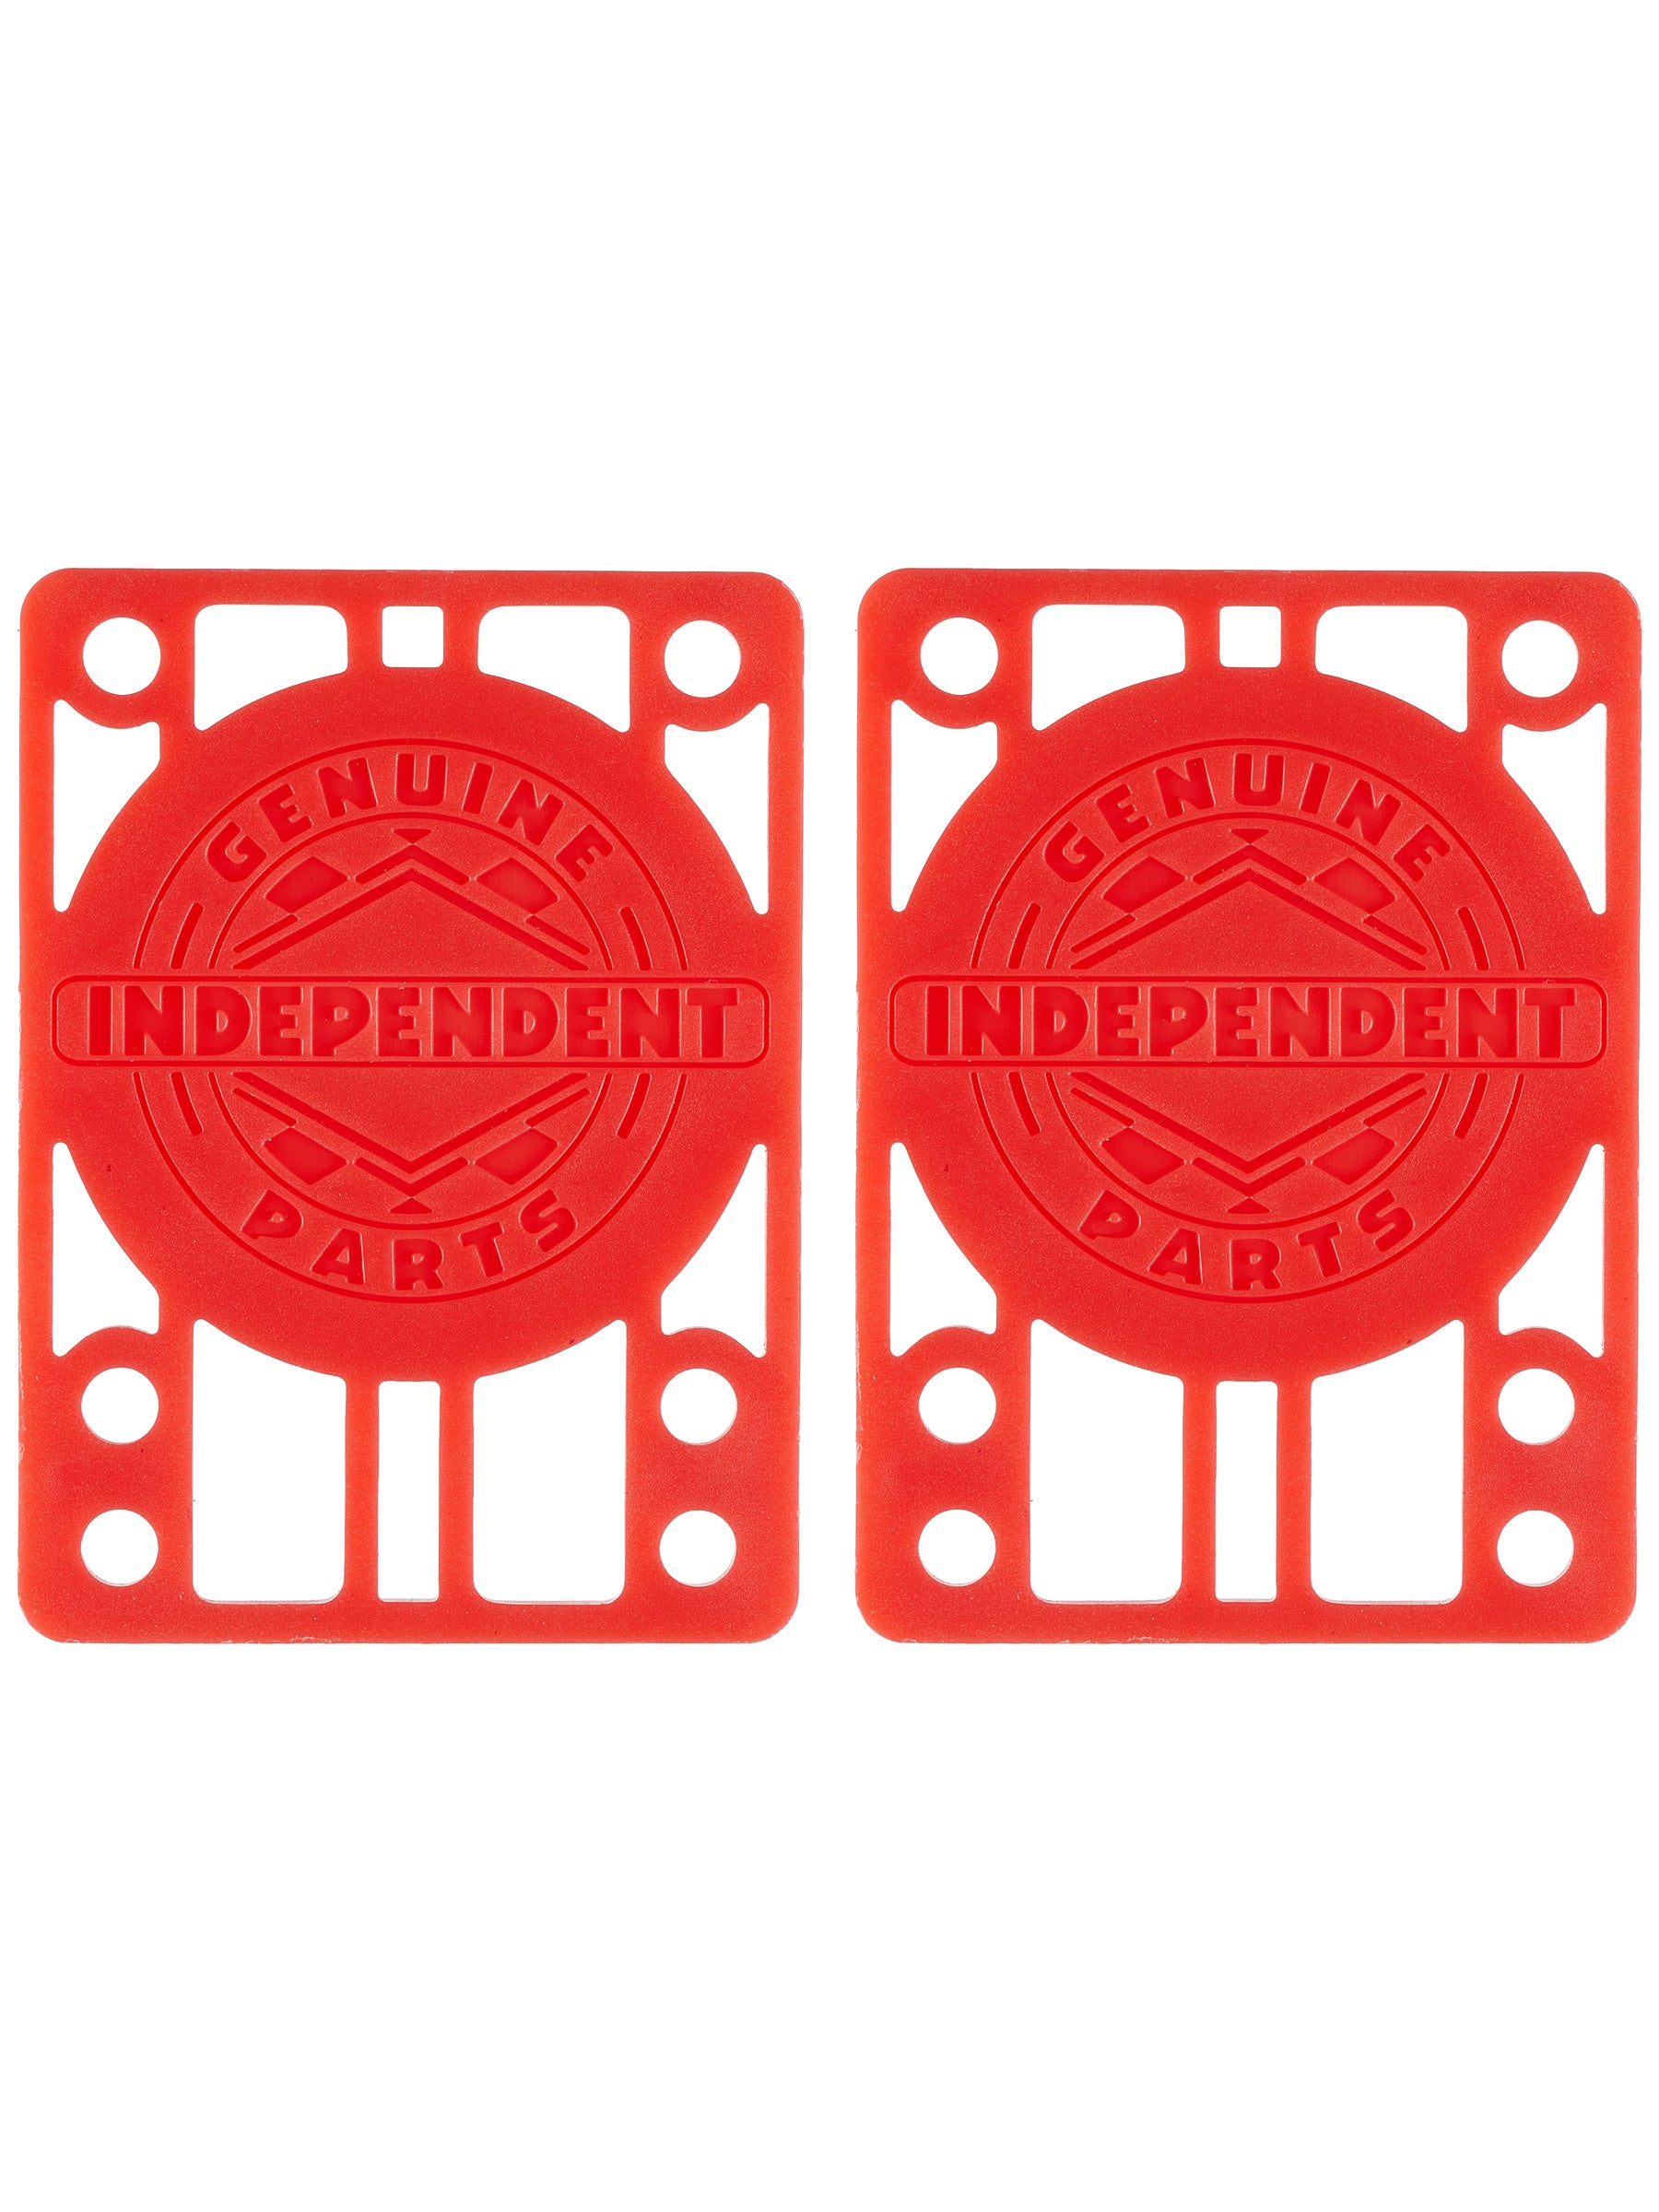 INDEPENDENT SKATEBOARD RED RISER PADS  1/8" SET OF 2 PADS *NEW* 